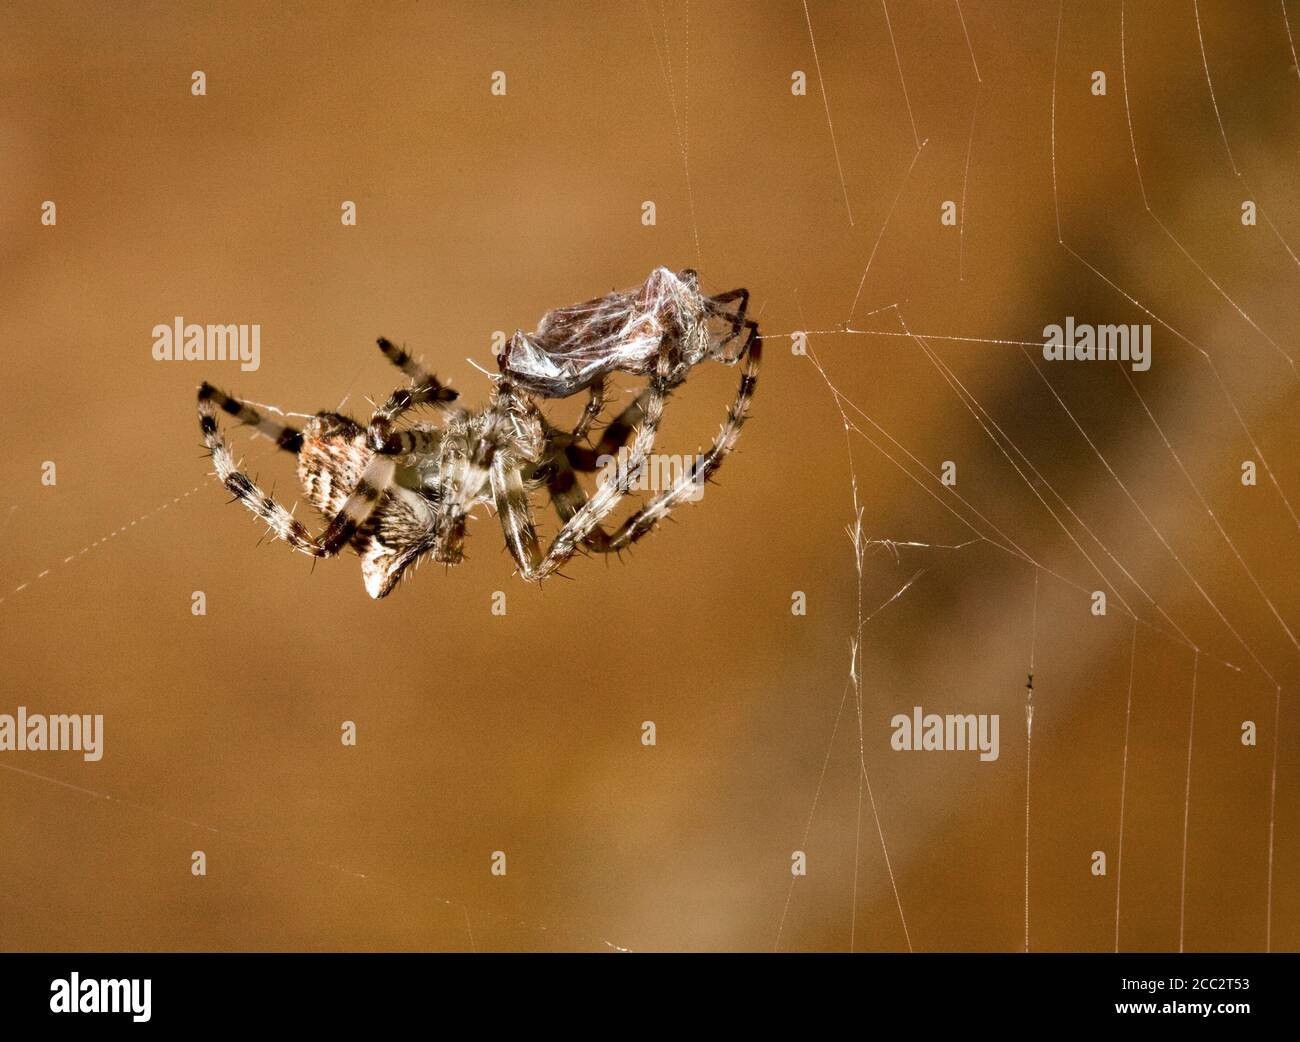 A Cross Orbweaver spider, raneus diadematus, hanging in its web, on the side of a wooden house in central Oregon. Stock Photo